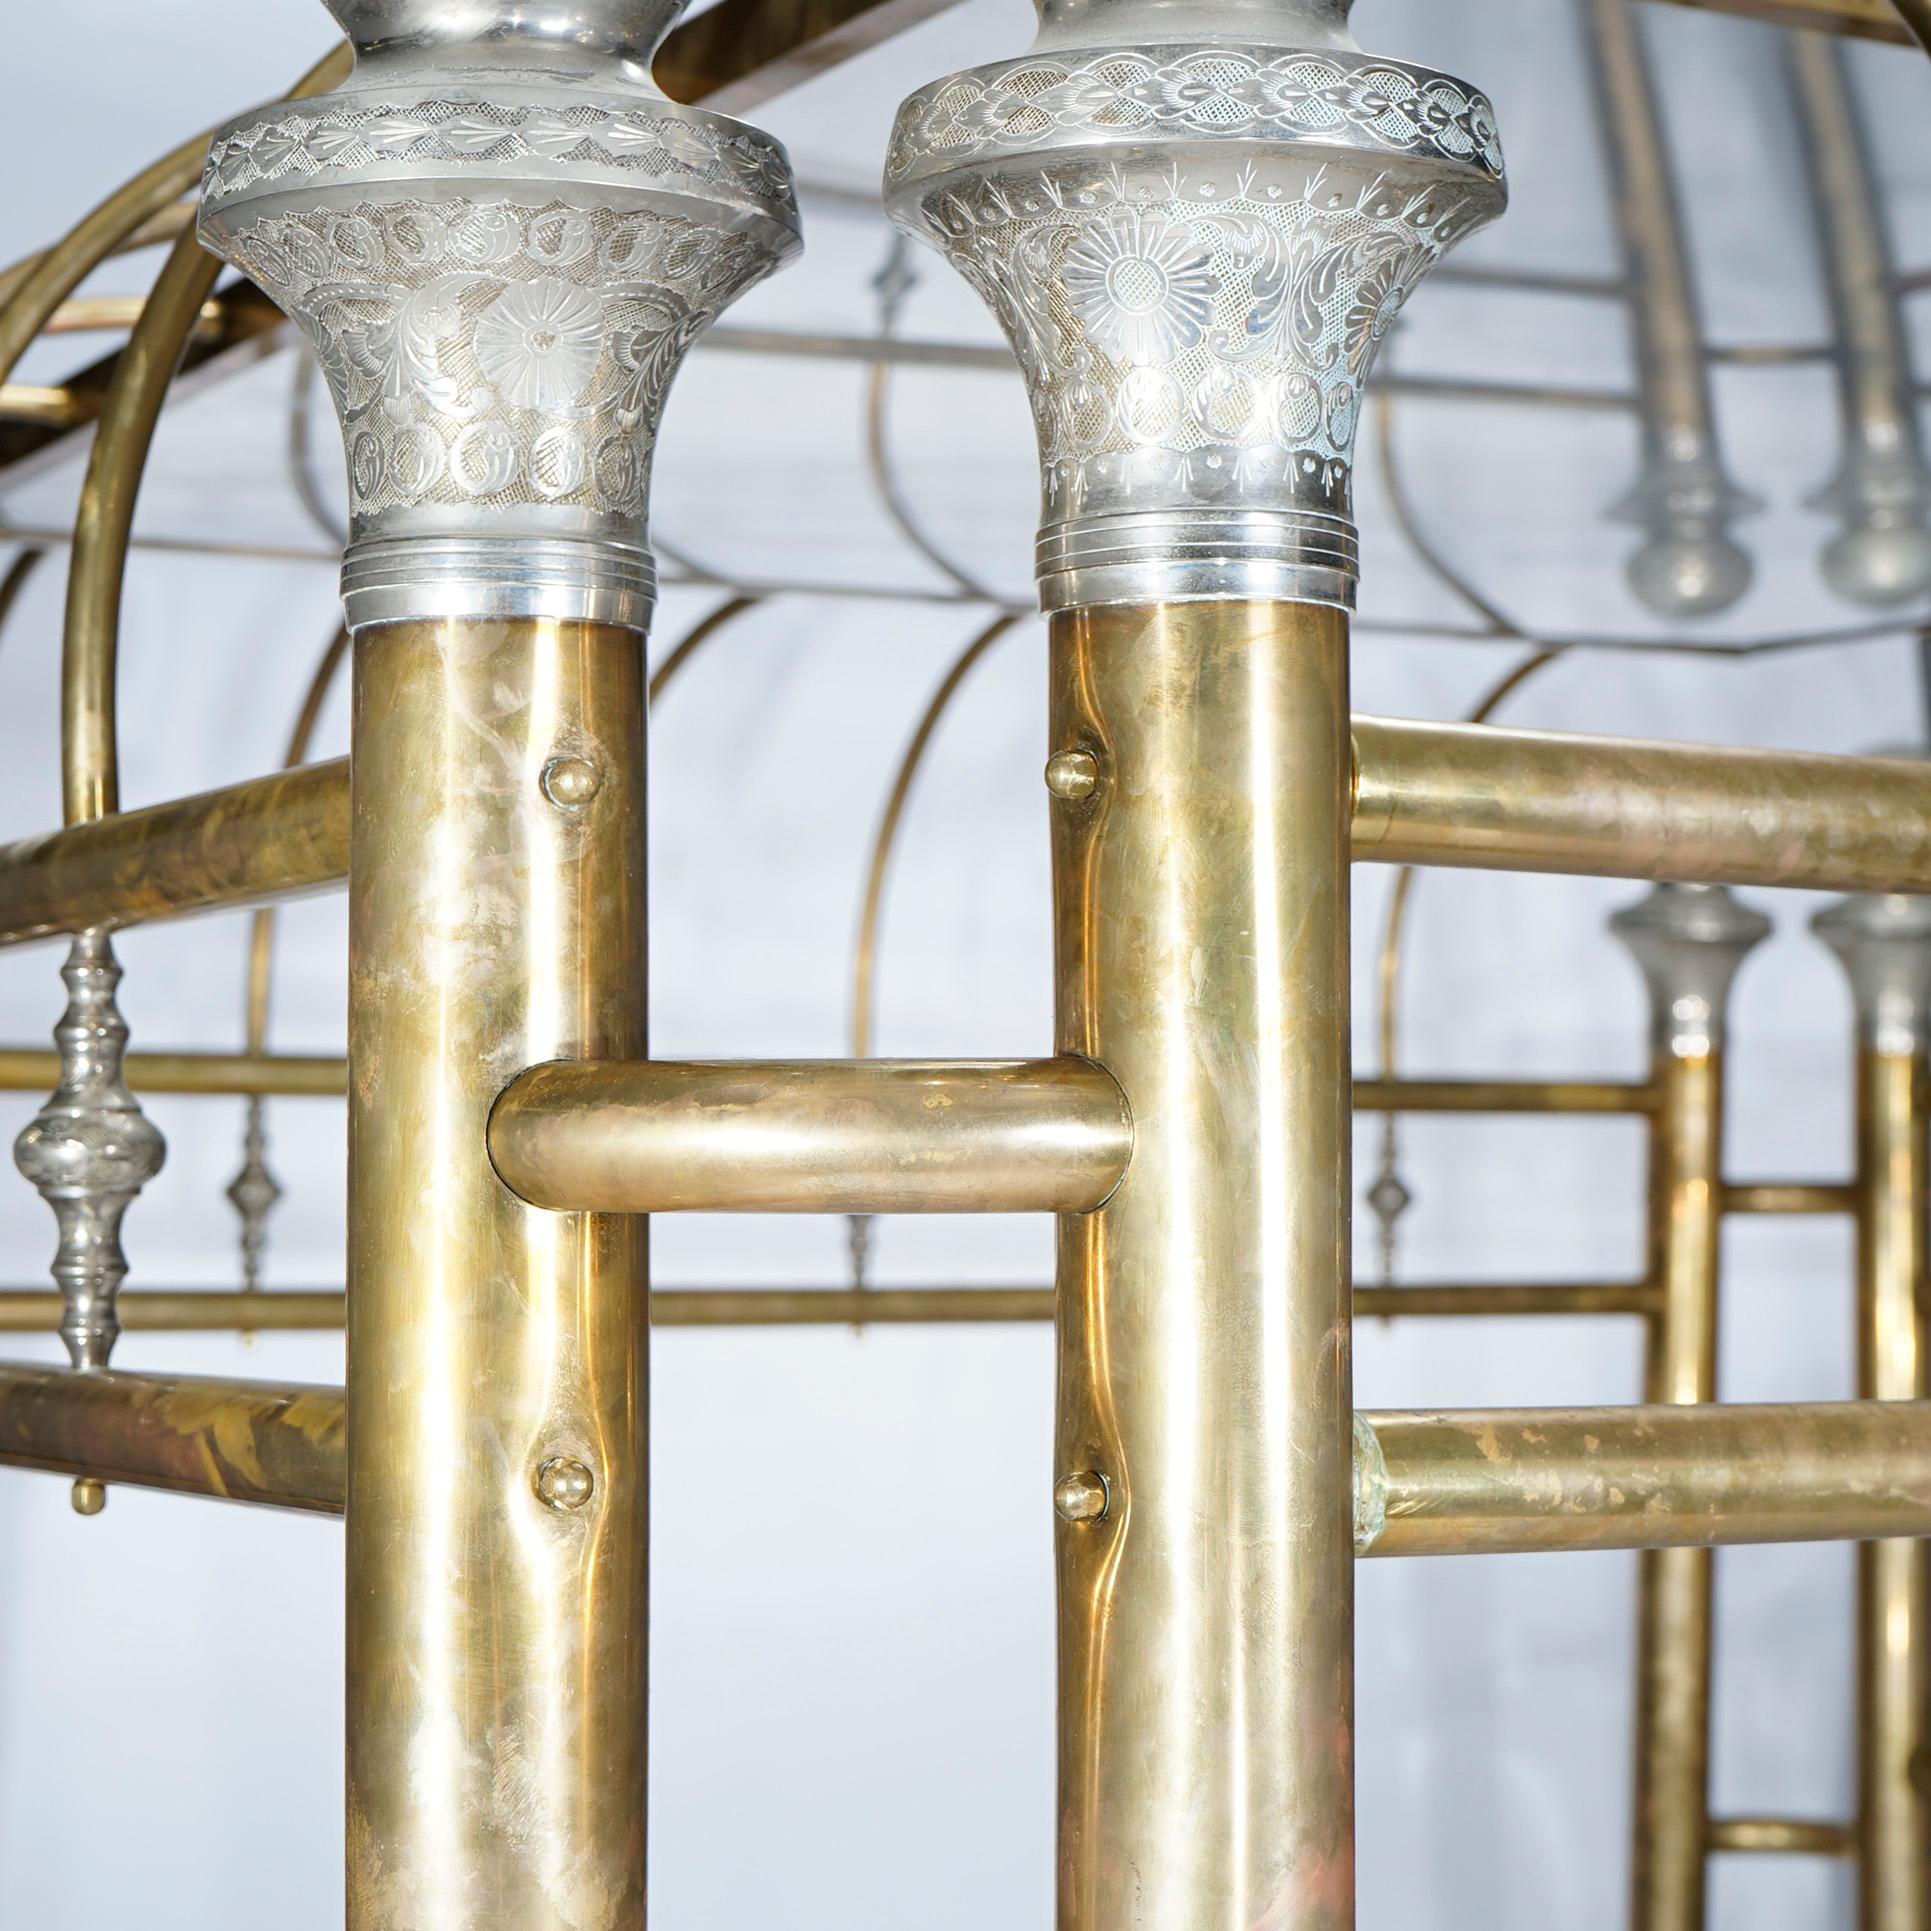 Monumental Regal Brass Bed with Mirrored Canopy & Silver Gilt Highlights, 20th C 6